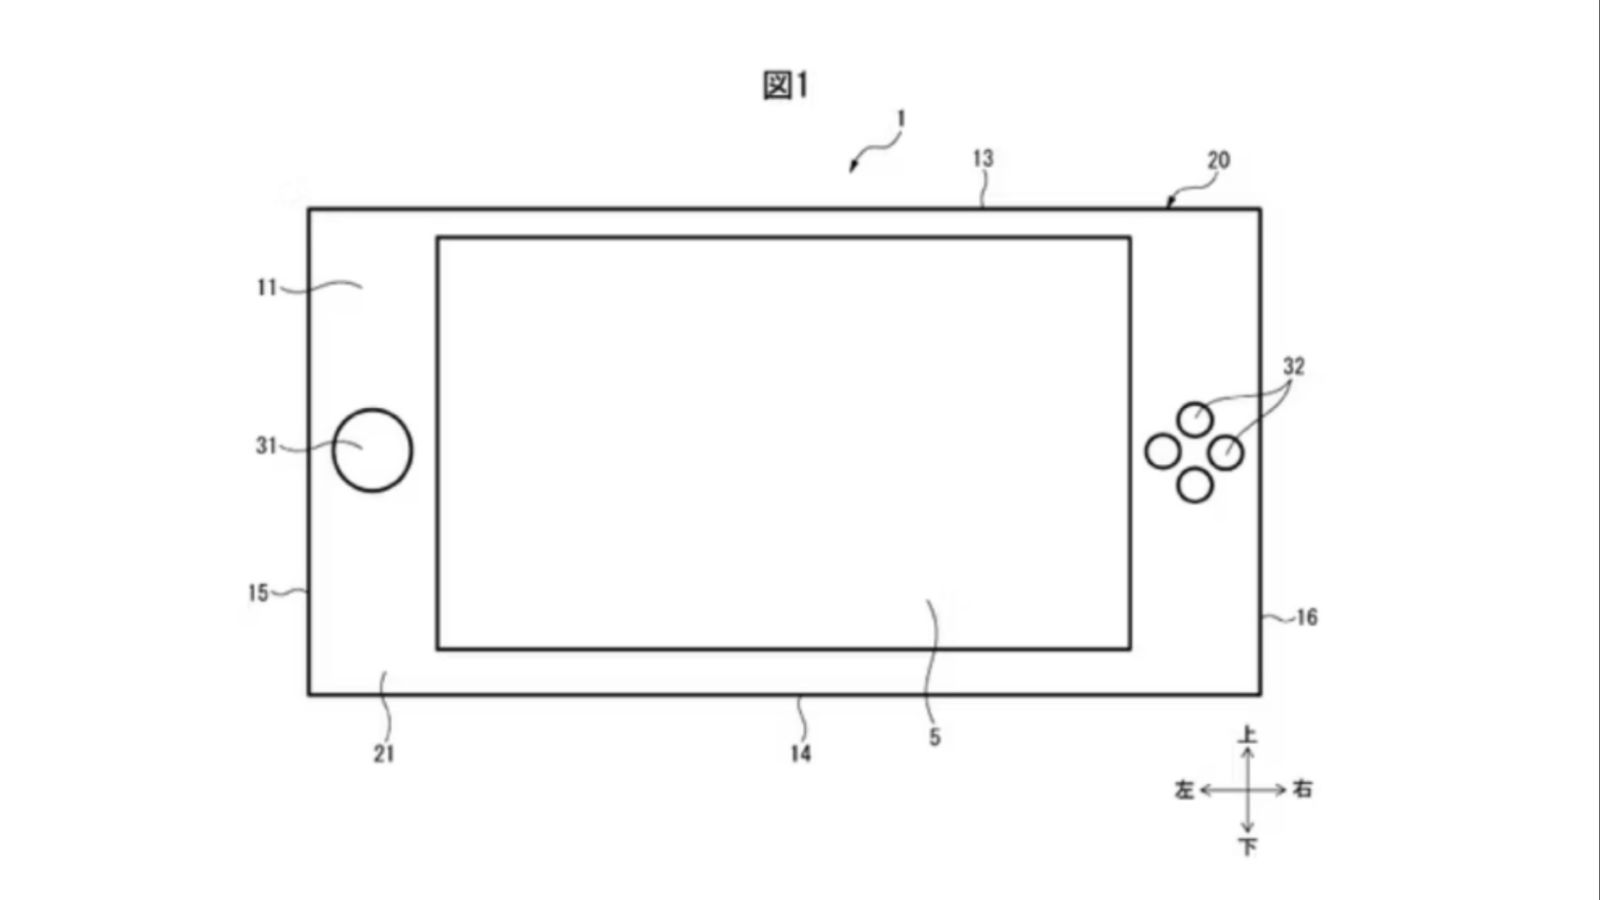 Switch 2 patent with several labelled sections